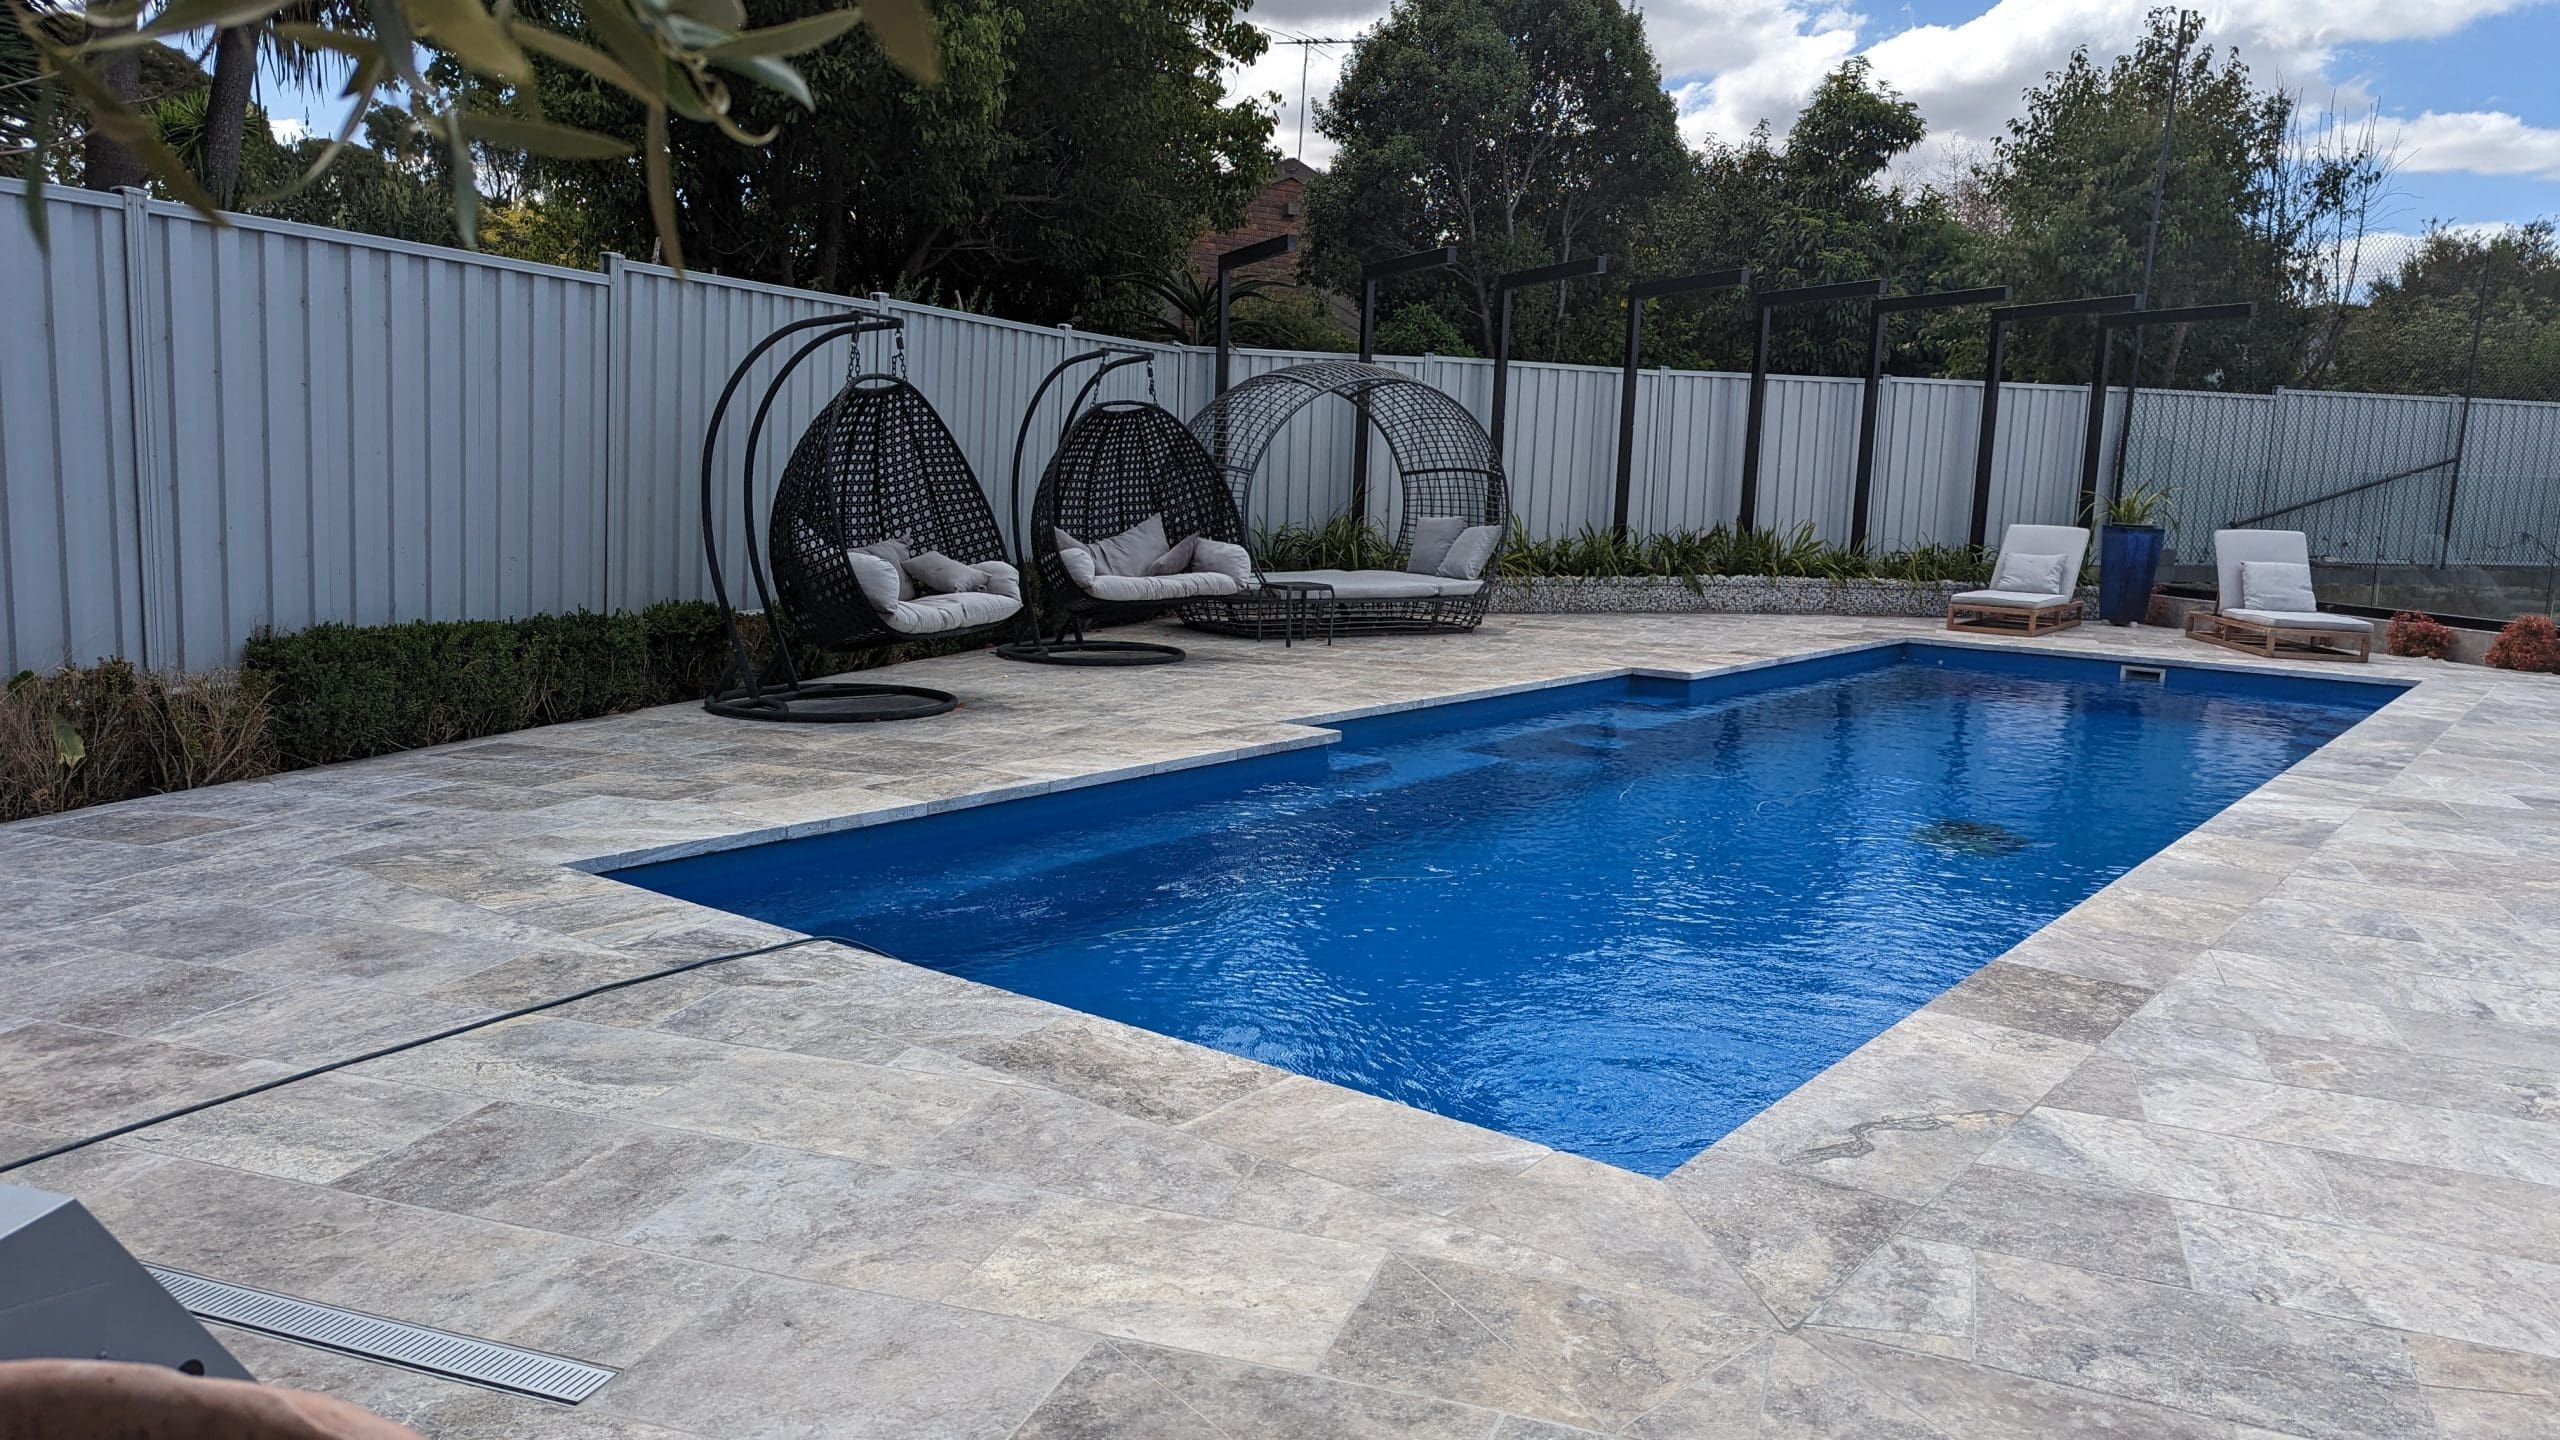 PREMIUM SILVER TRAVERTINE_RMS TRADERS_NATURAL STONE SUPPLIER POOL COPING TILES AND PAVING MELBOURNE (5)